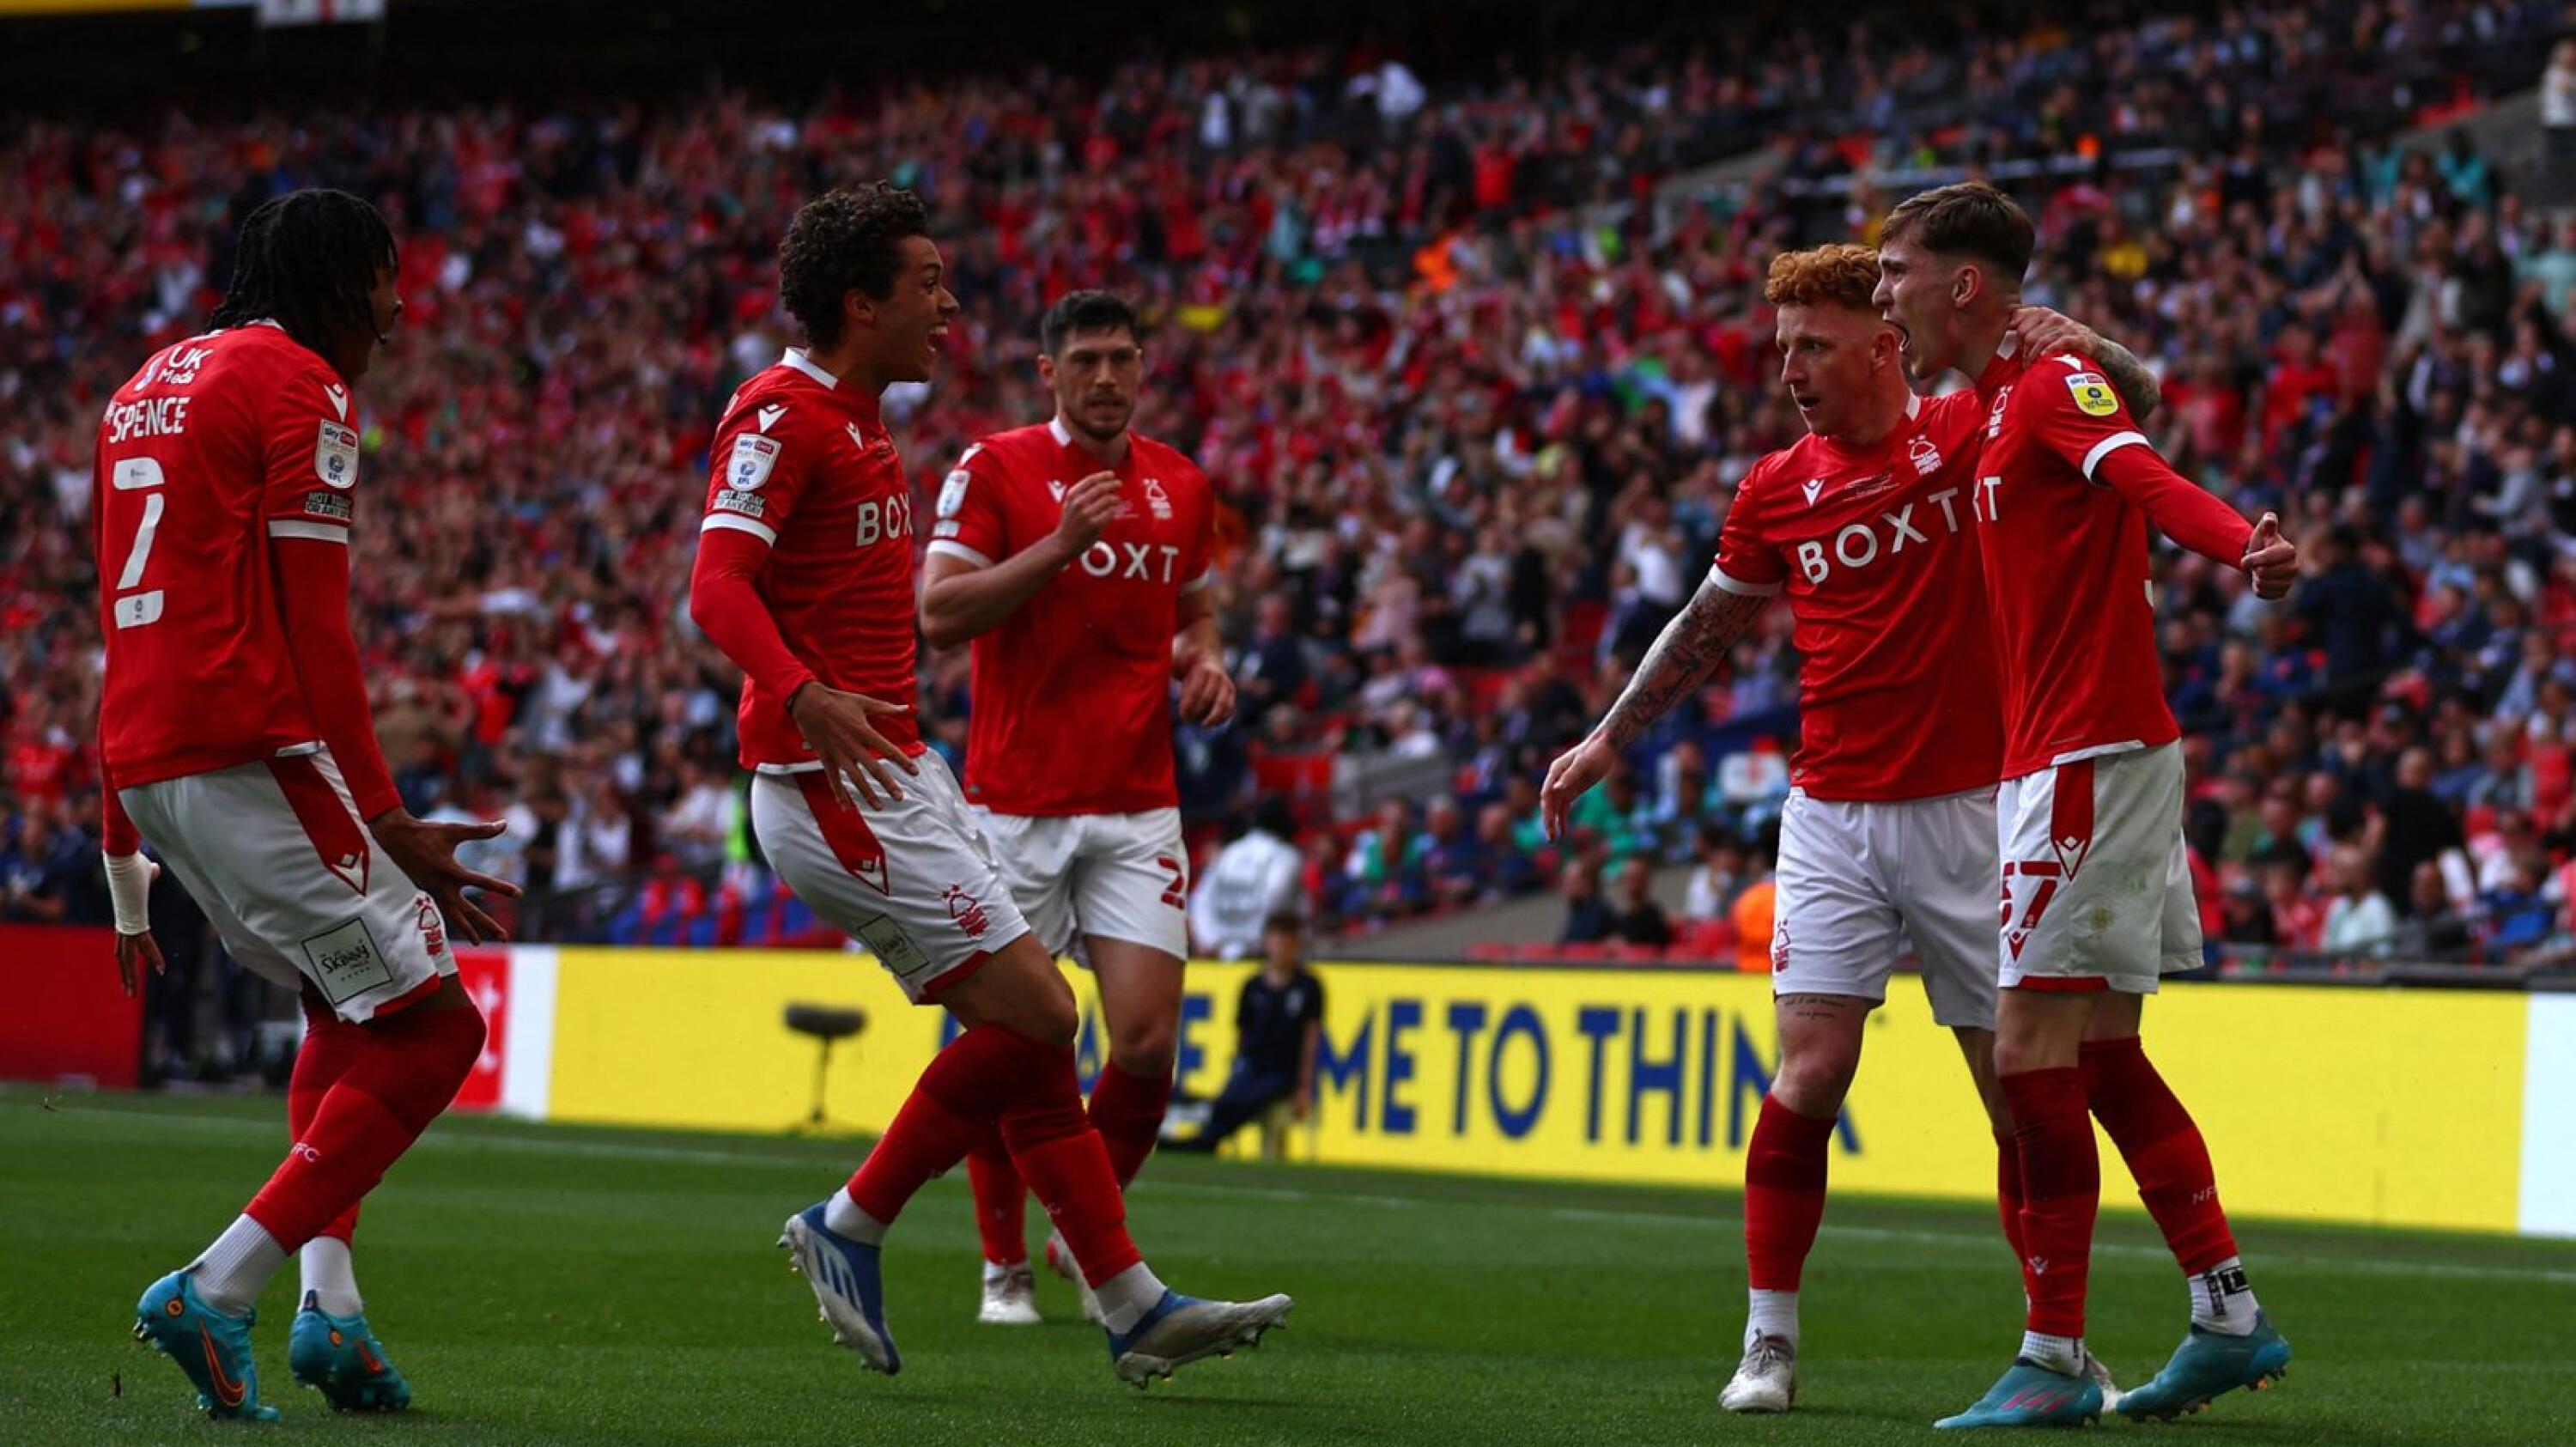 Nottingham Forest's team-players celebrates after Huddersfield Town's English defender Levi Colwill (unseen) scored an own goal during their English Championship play-off final at Wembley Stadium in London, on Sunday